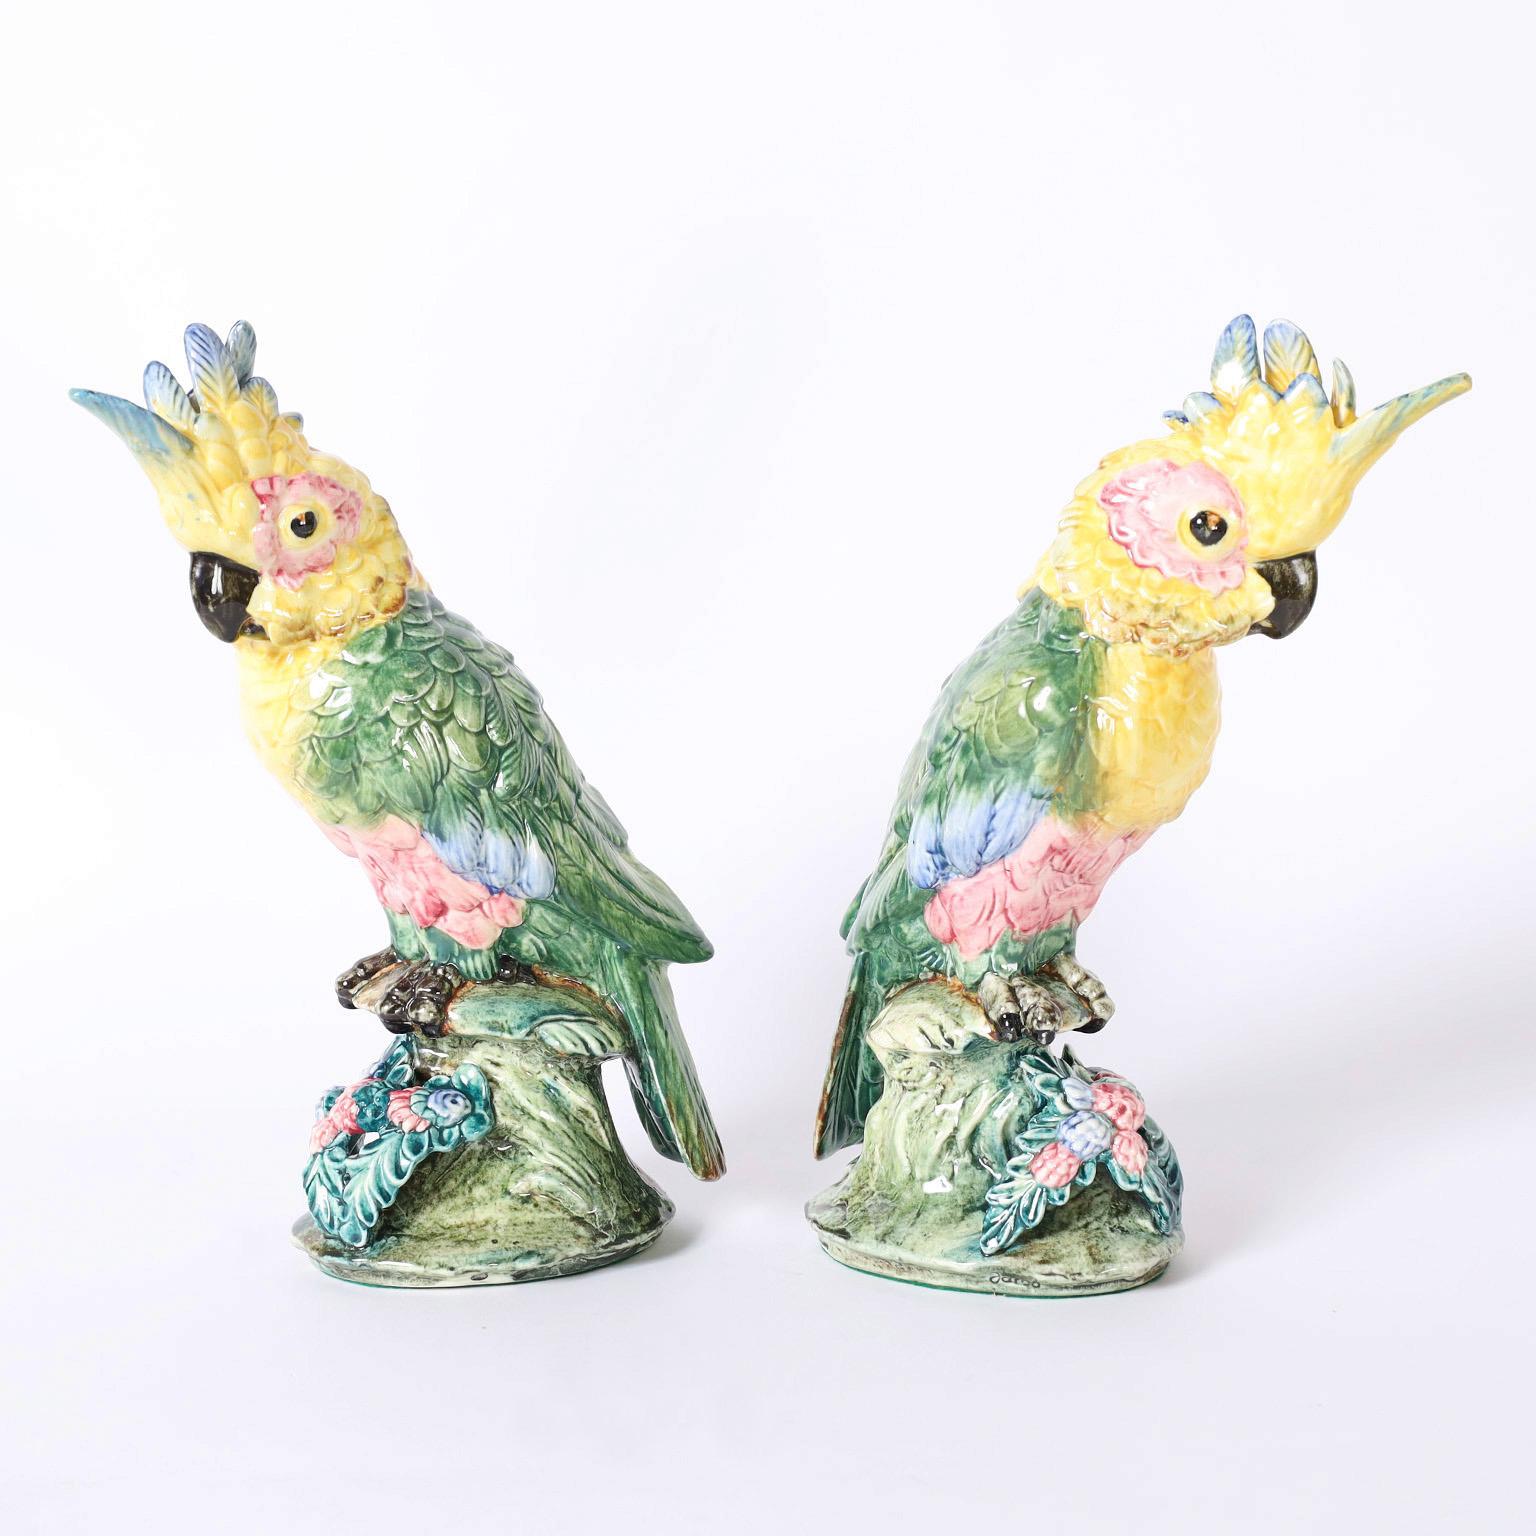 Delightful pair of cockatoos crafted in porcelain and decorated in bold tropical colors signed Stangl Pottery on the bottoms.